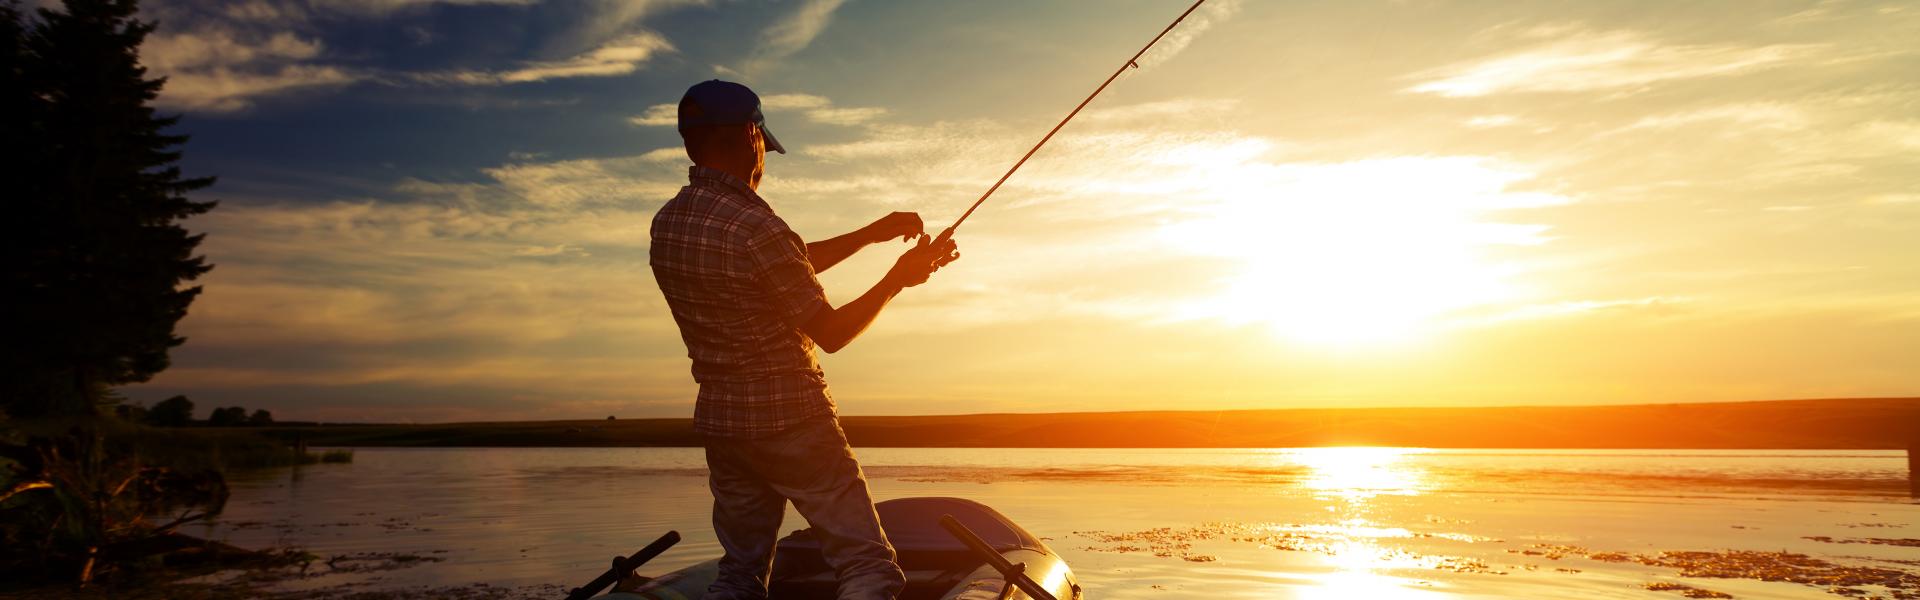 Fishing Holidays in Newquay - HomeToGo